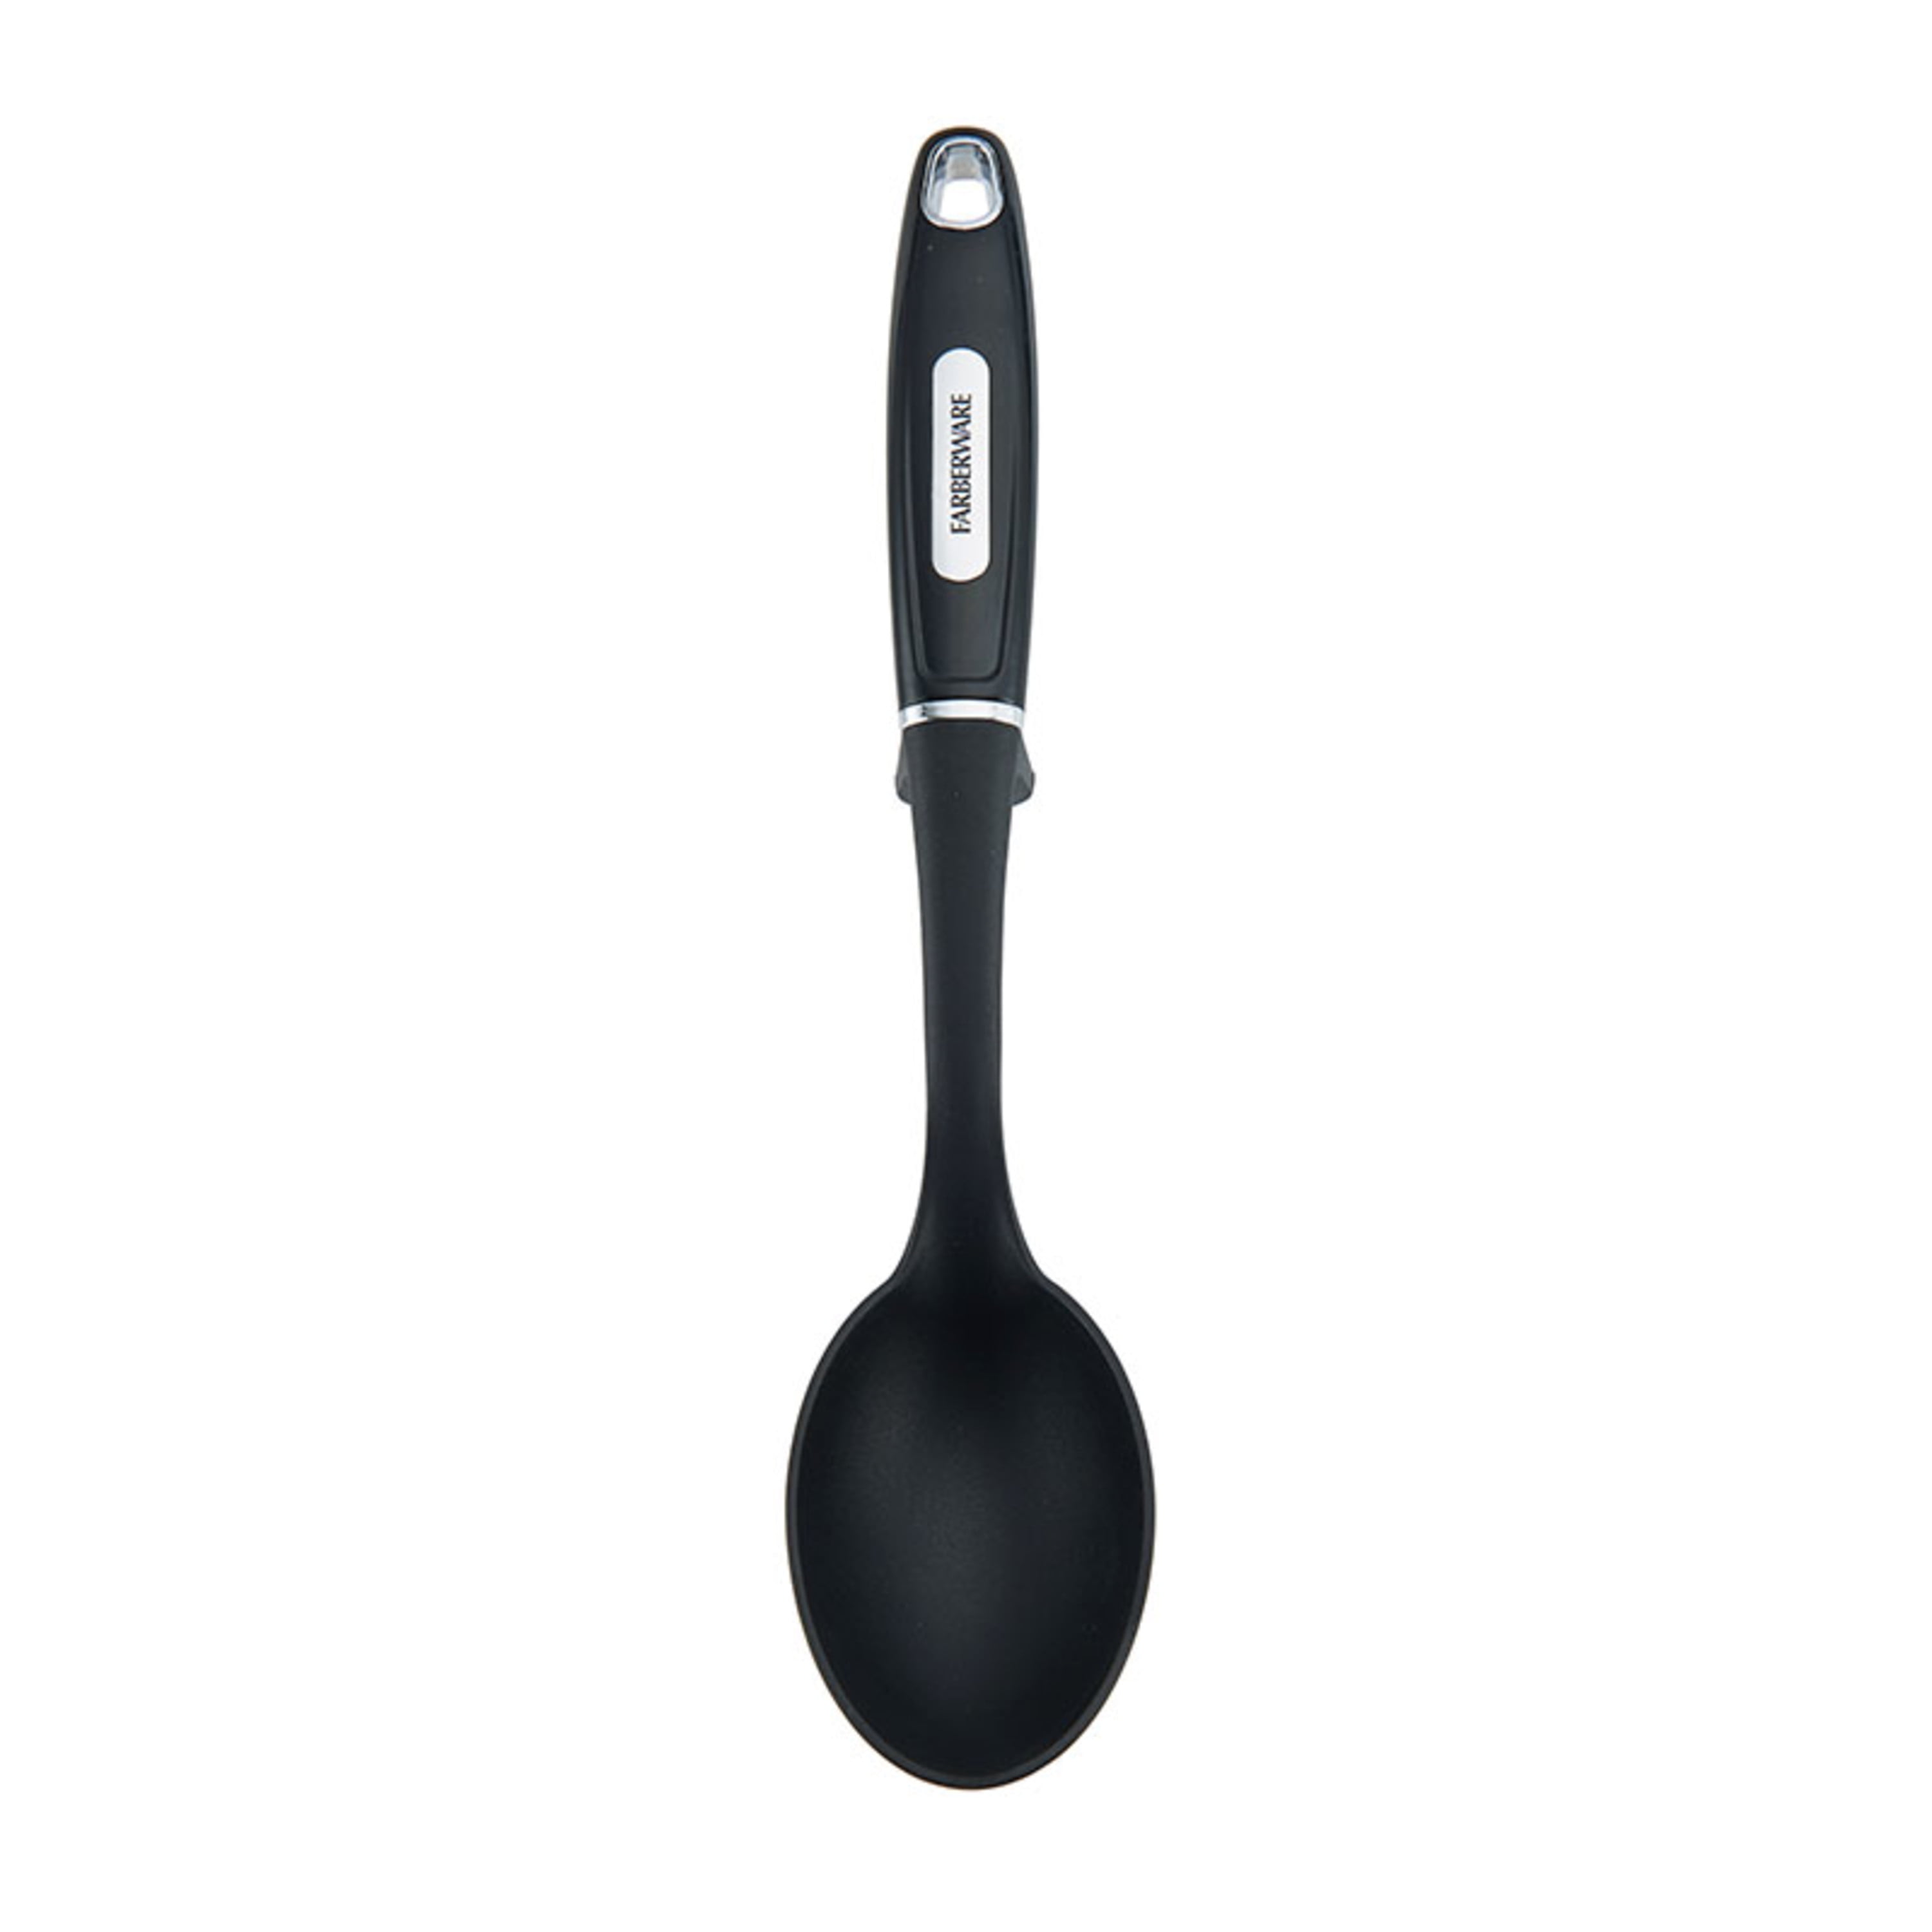  Farberware Professional Soft Handled Slotted Straining Spoon  with Perforations Heavy-Duty Heat Resistant Nylon Safe for Non-stick  Cookware, 13-Inch, Black: Home & Kitchen